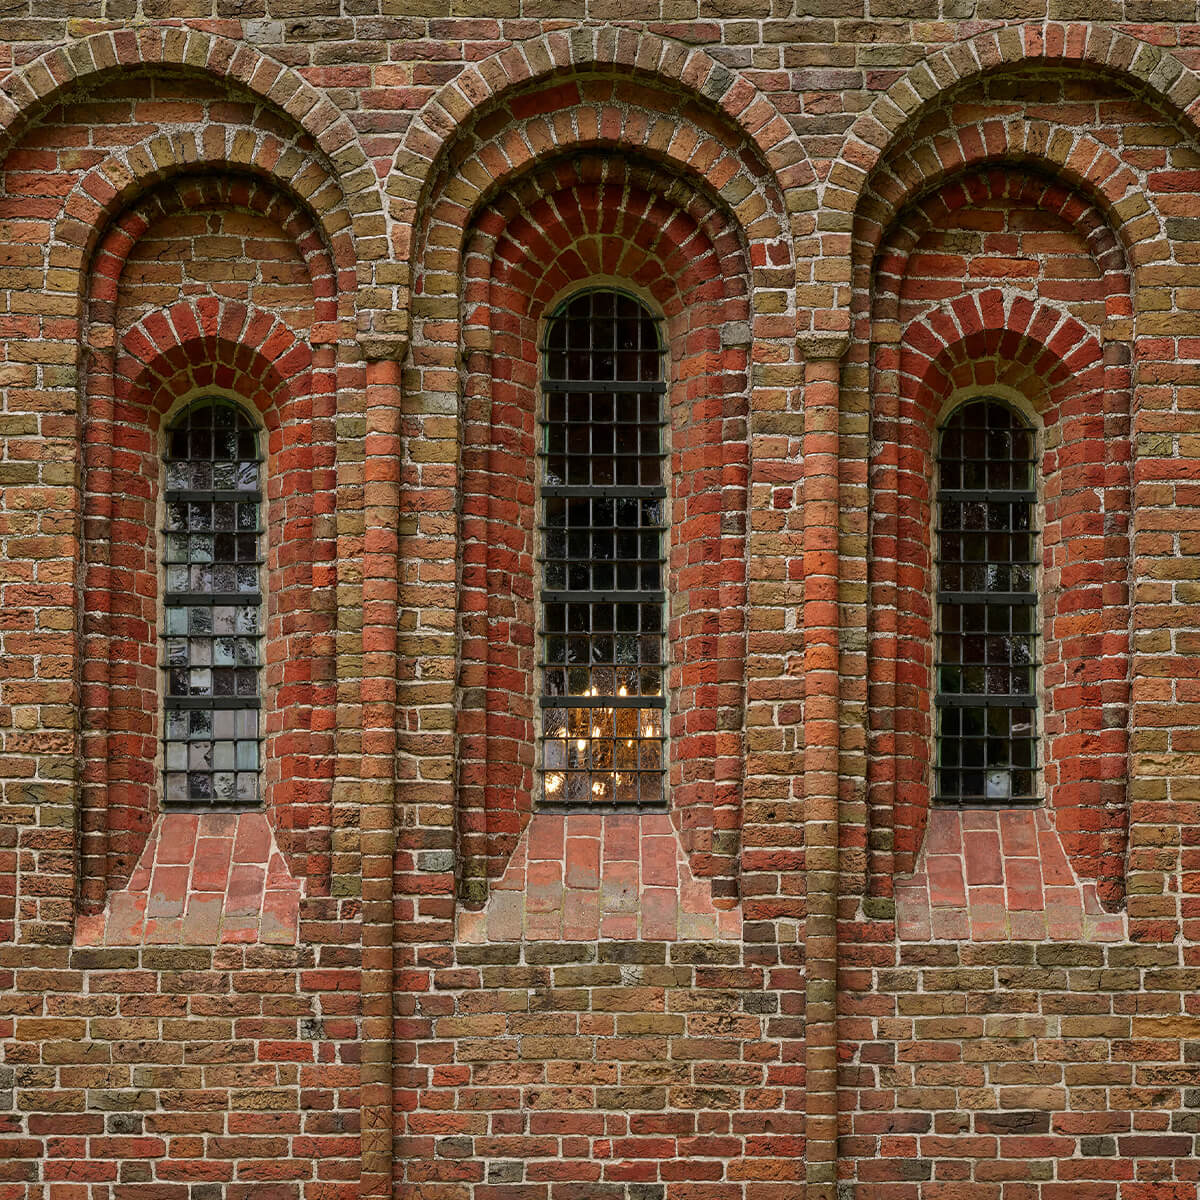 Brick wall with arches and windows